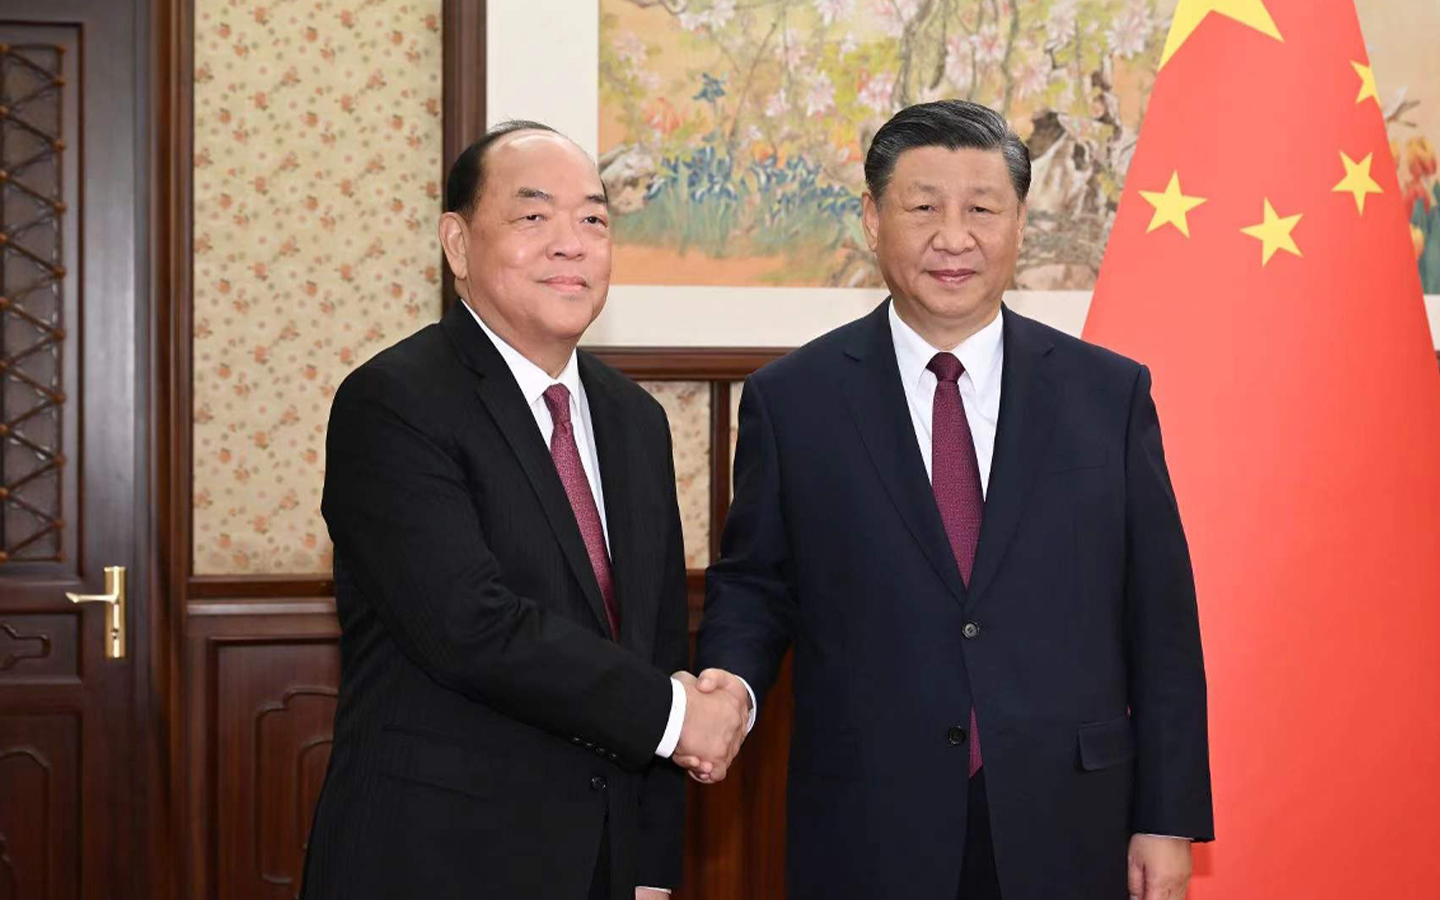 Macao’s governance gets a tick of approval from President Xi Jinping